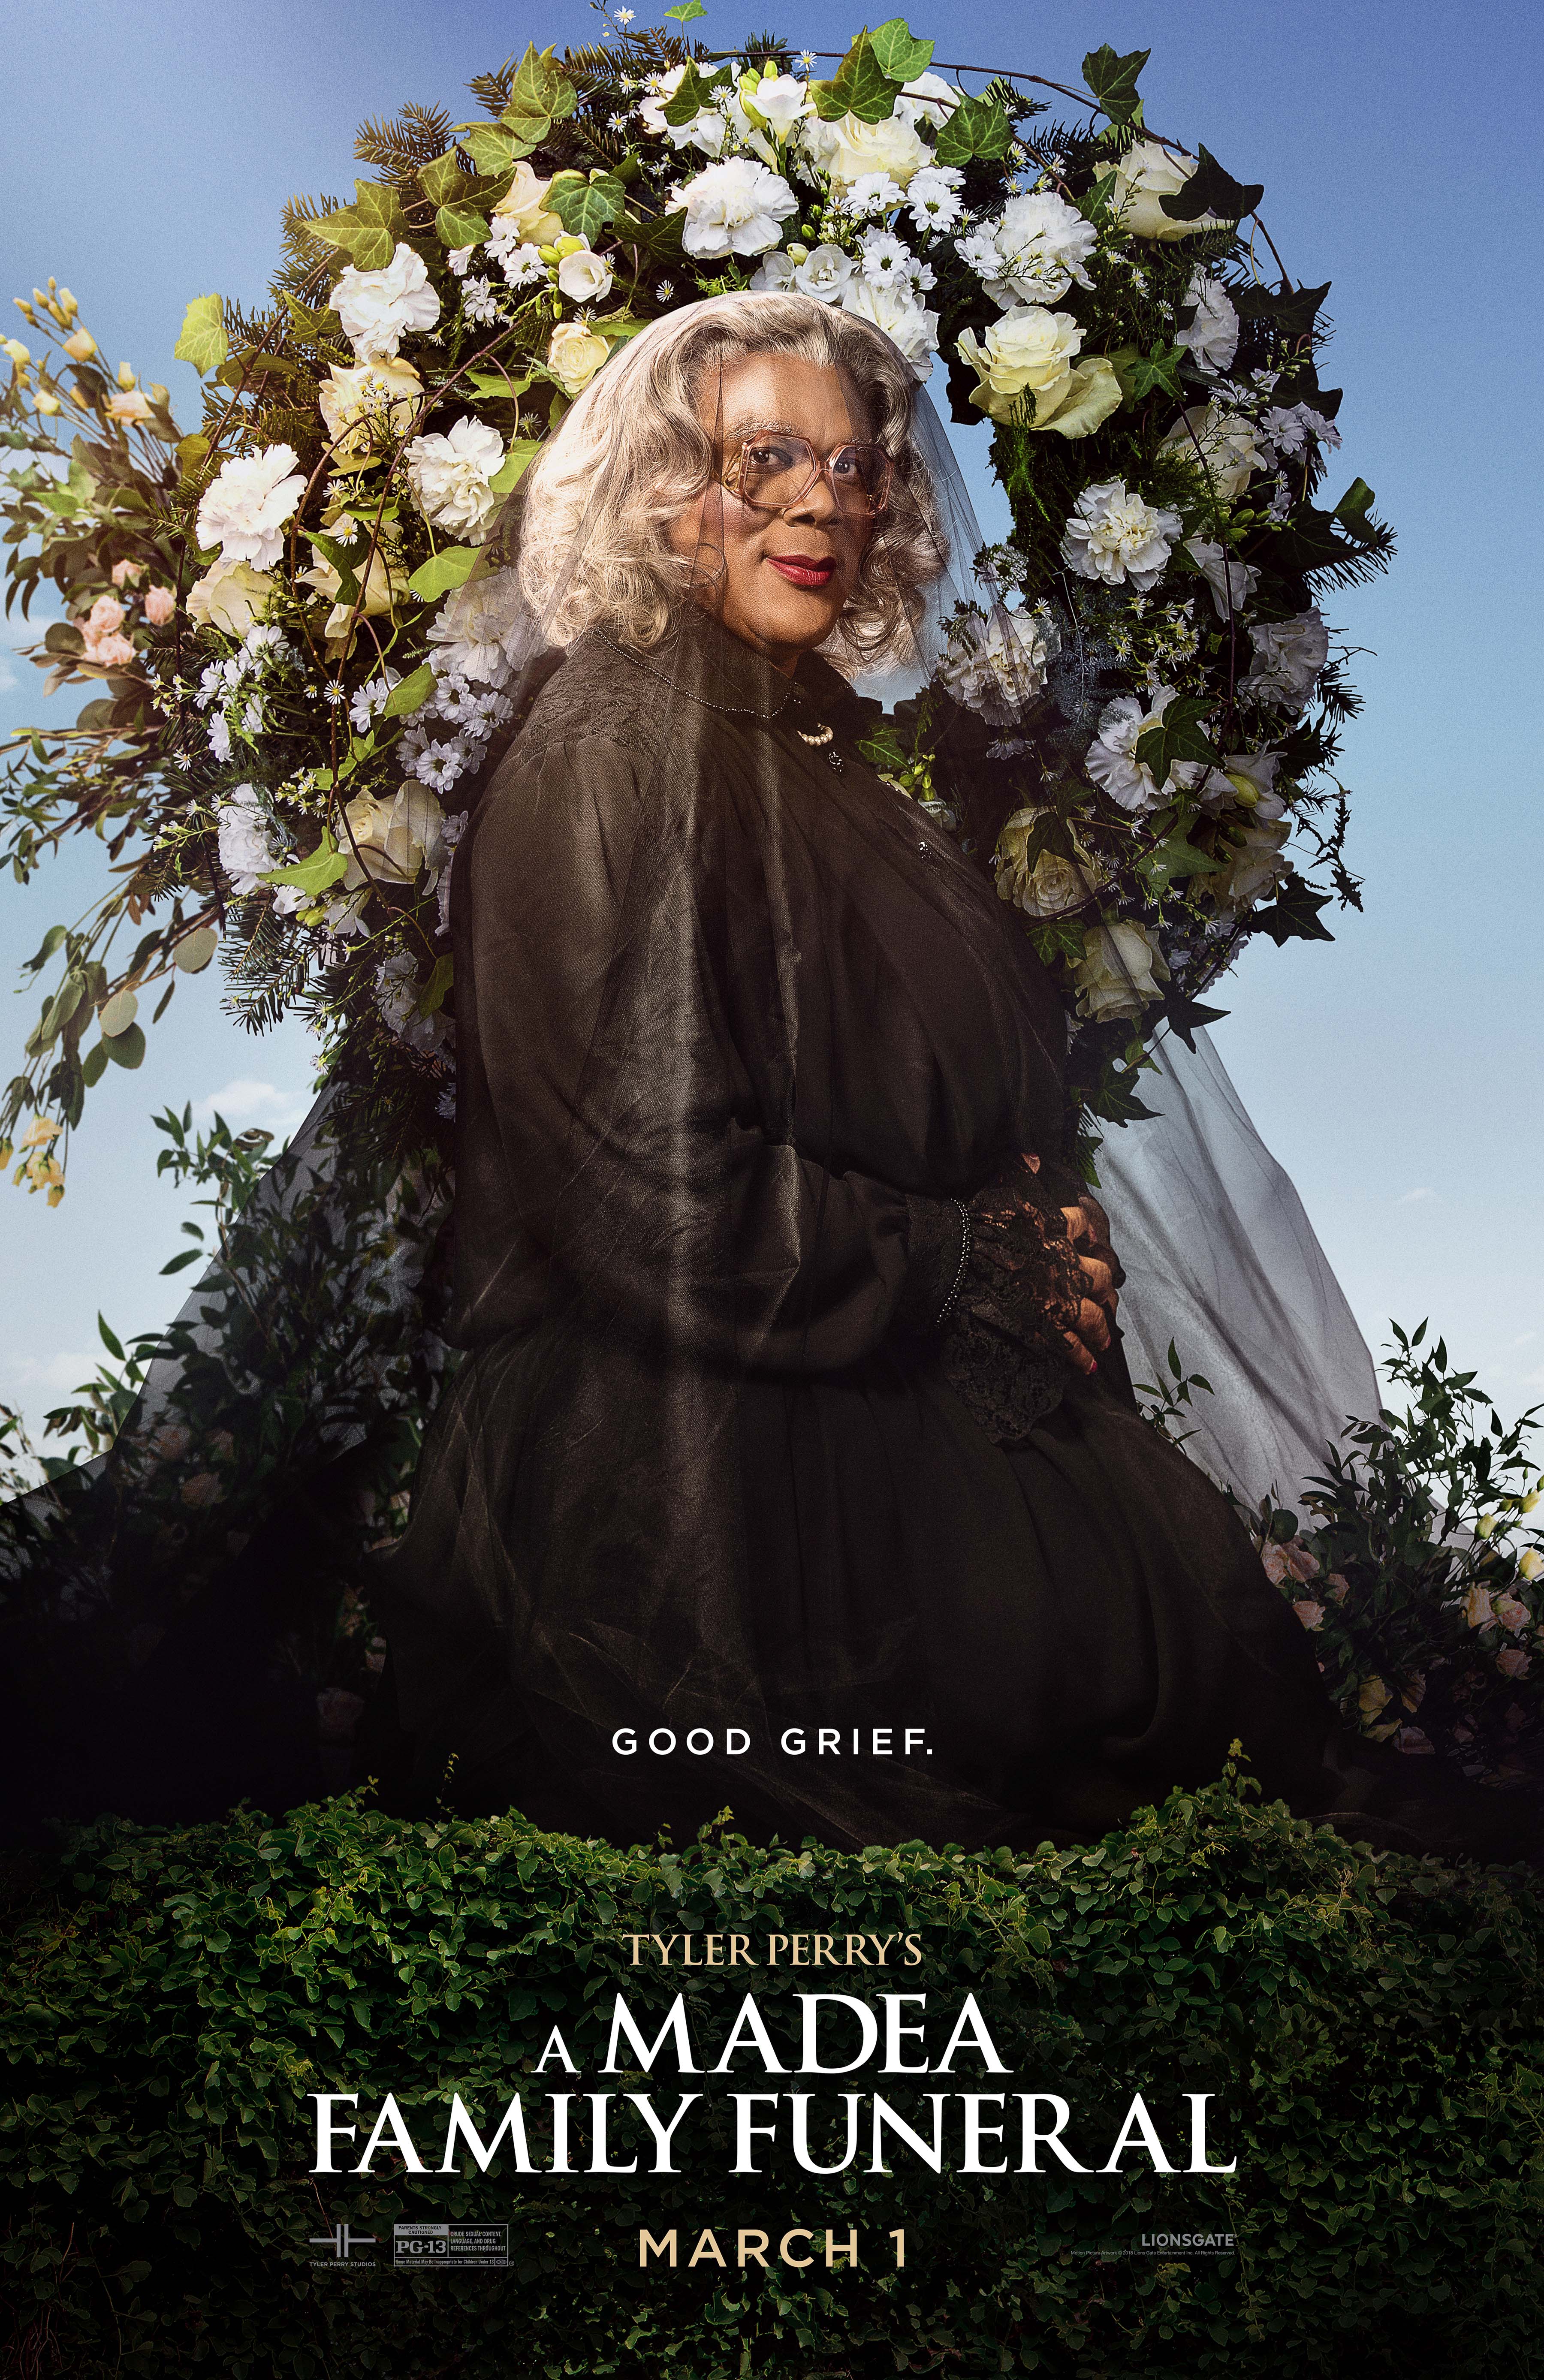 A Madea Family Funeral Photo Gallery